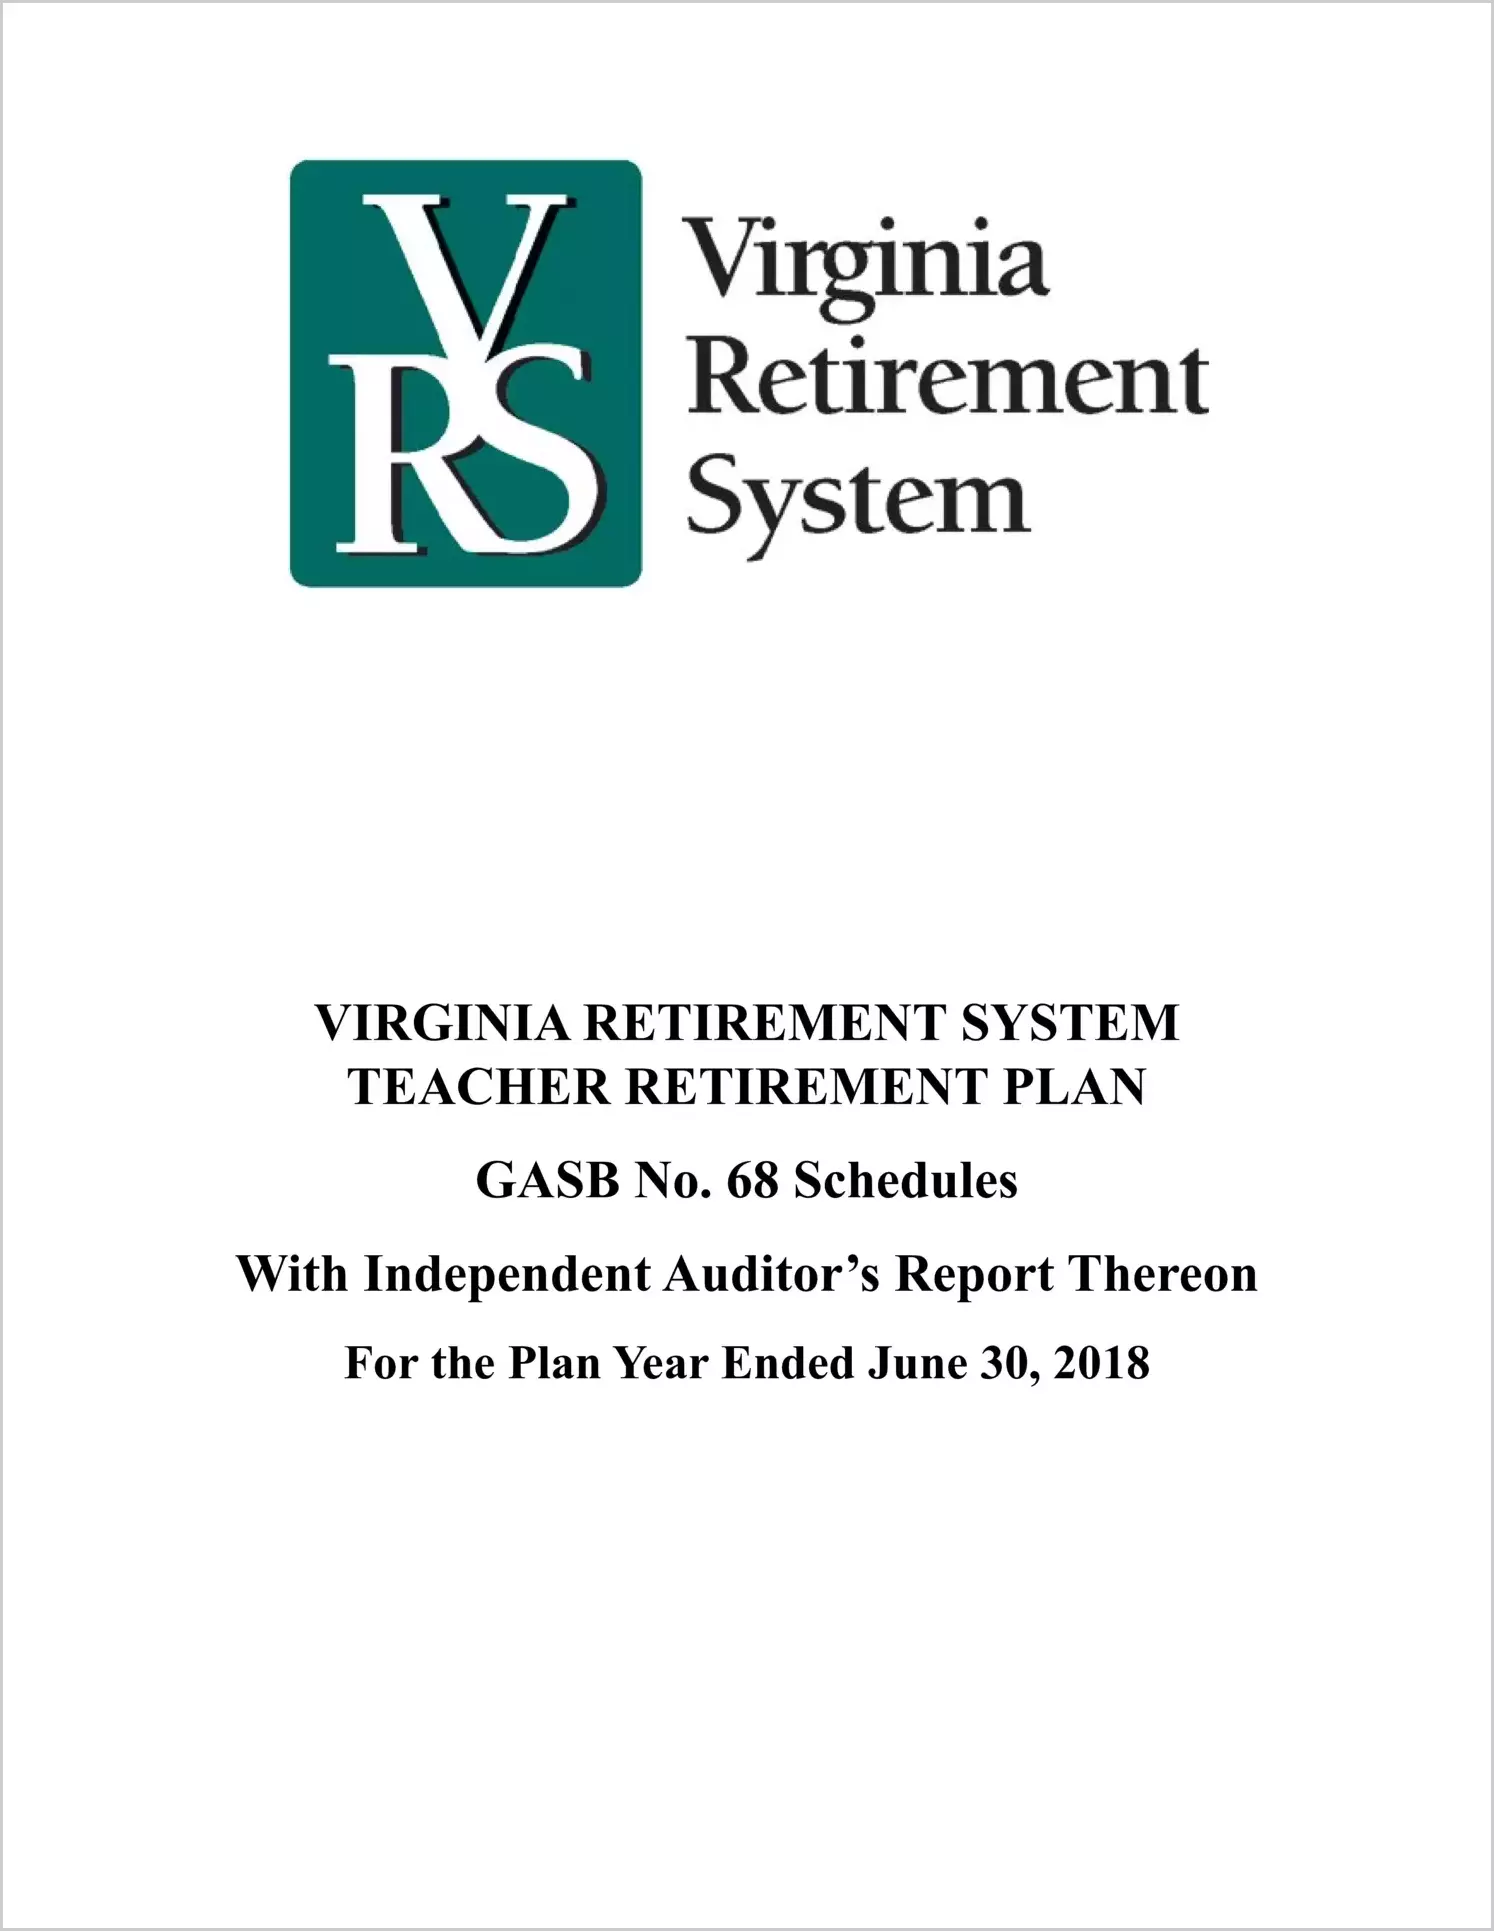 GASB 68 Schedule - Virginia Retirement System Teacher Retirement Plan for the plan year ended June 30, 2018